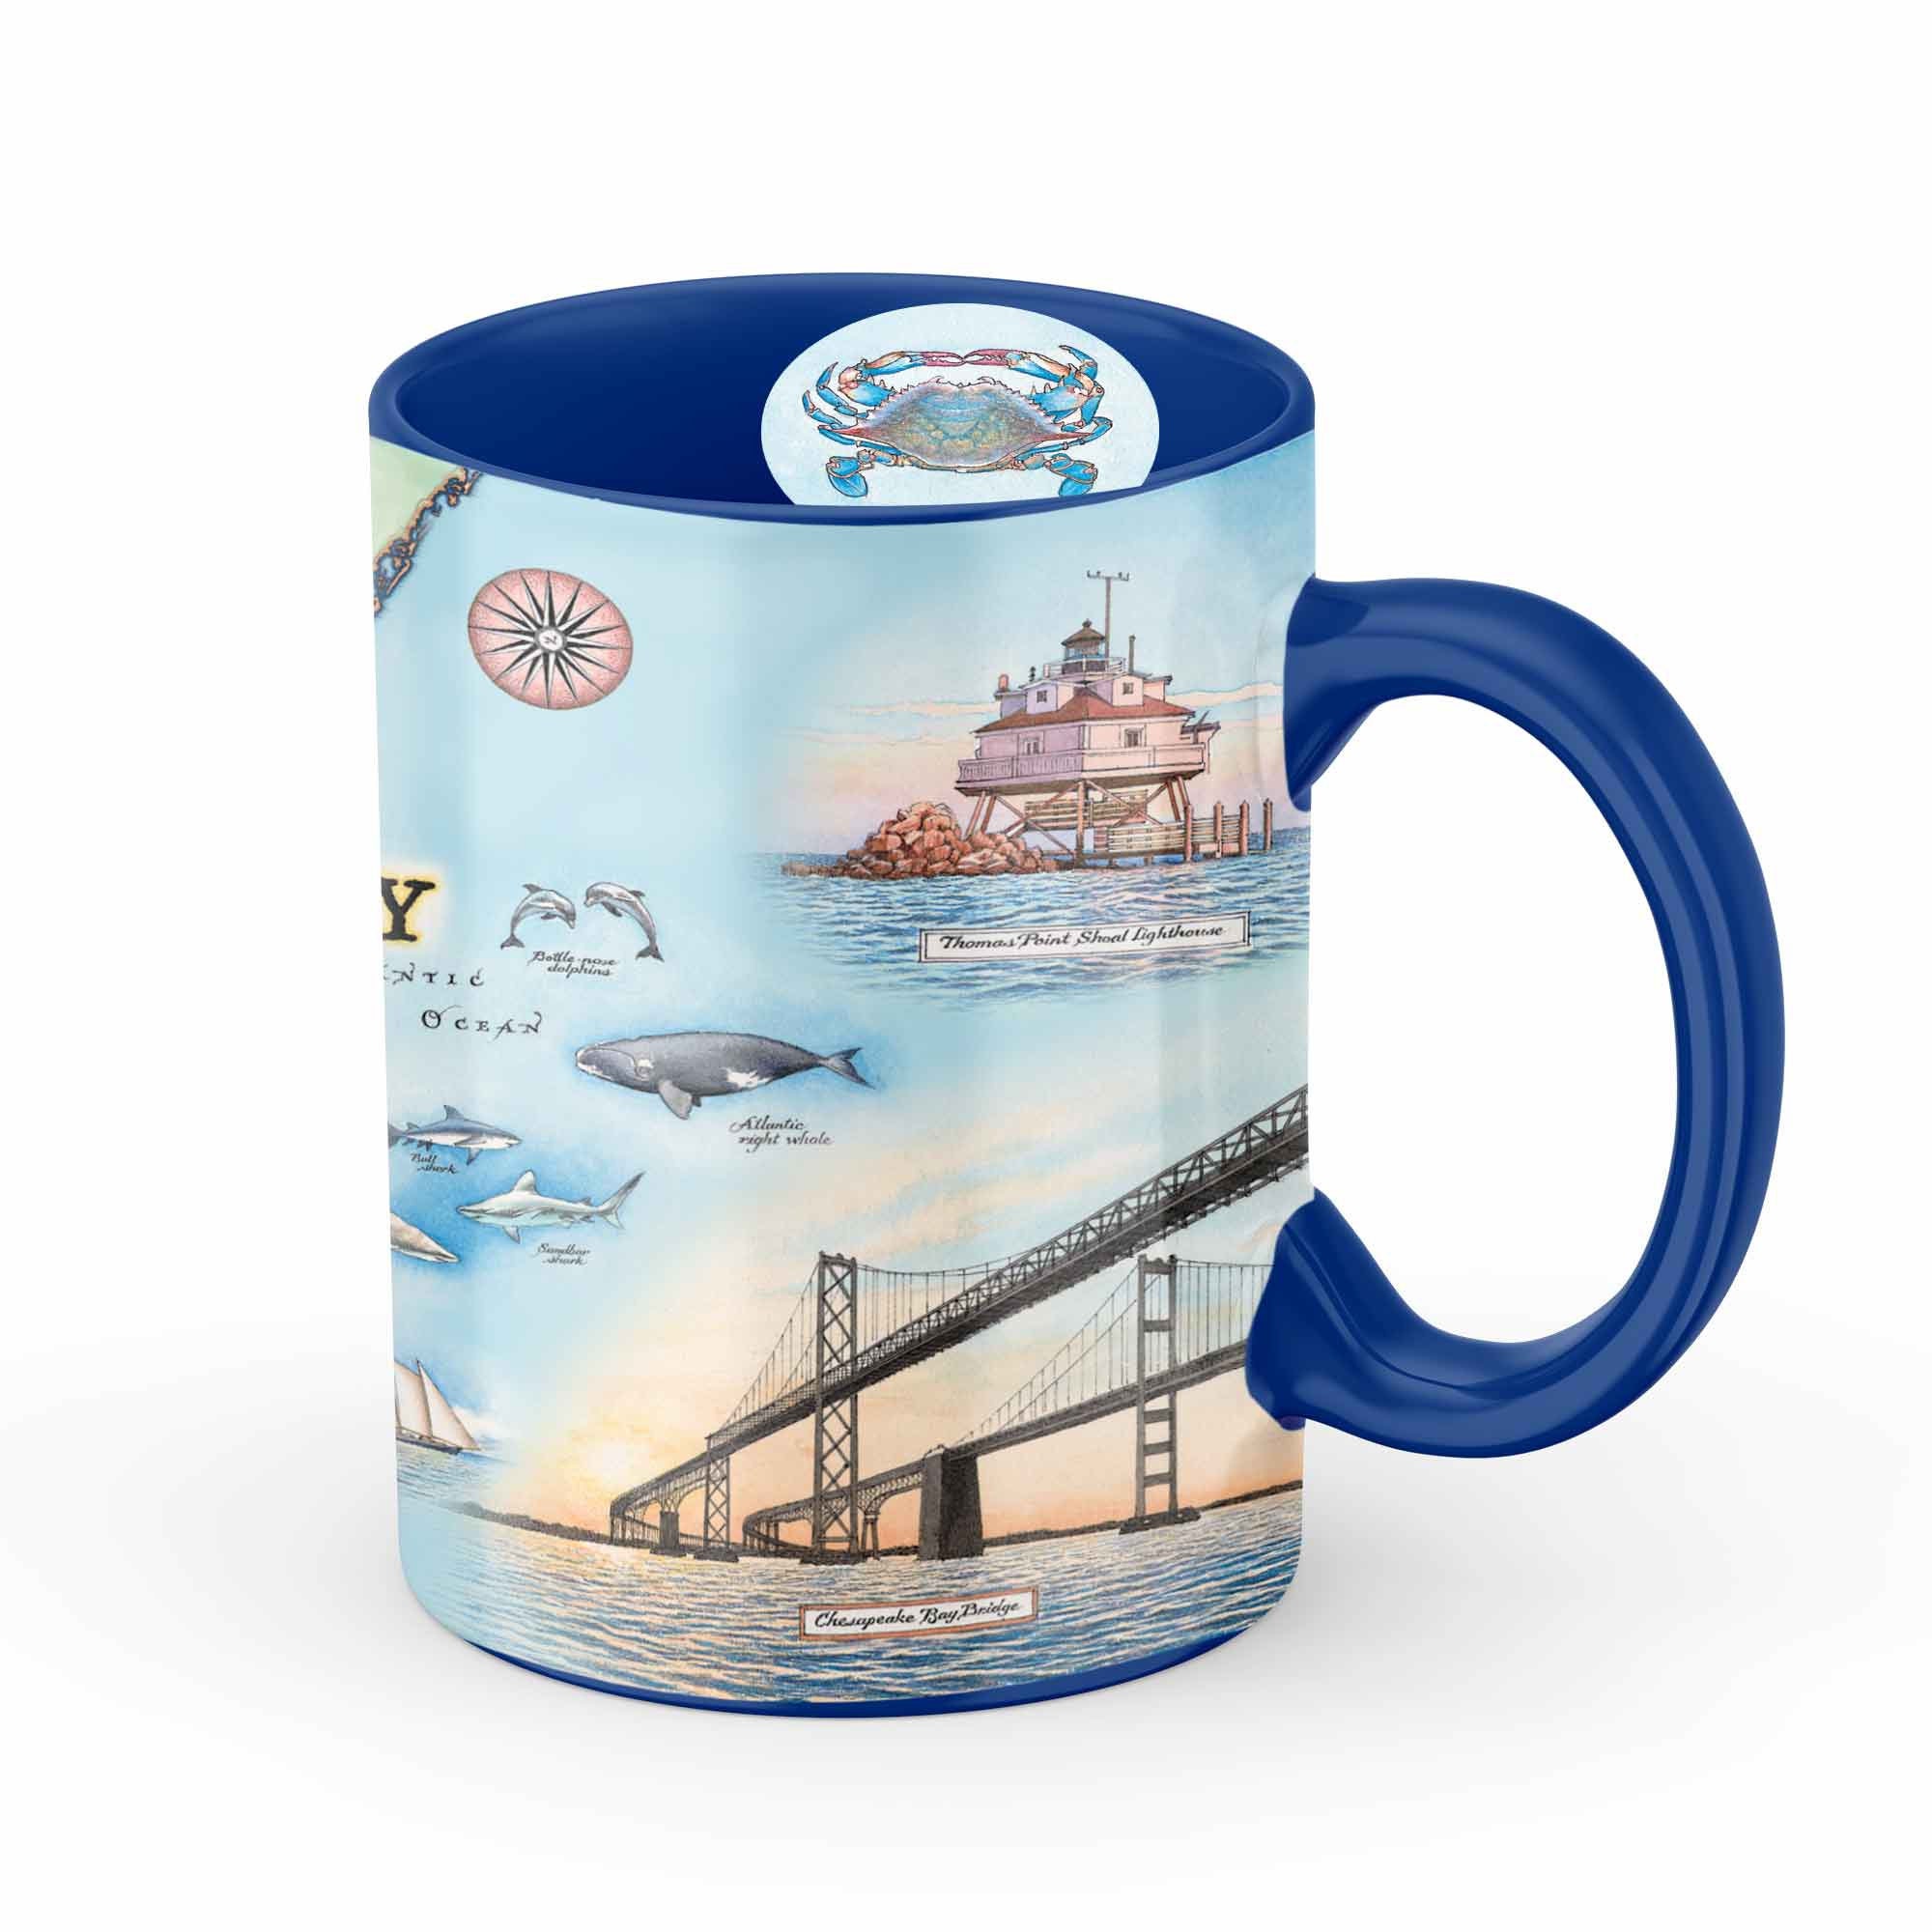 16oz Coffee Mugs with Lid for Women Travel Coffee Mug Insulated Tumblers  for Men Coffee Cups with Li…See more 16oz Coffee Mugs with Lid for Women